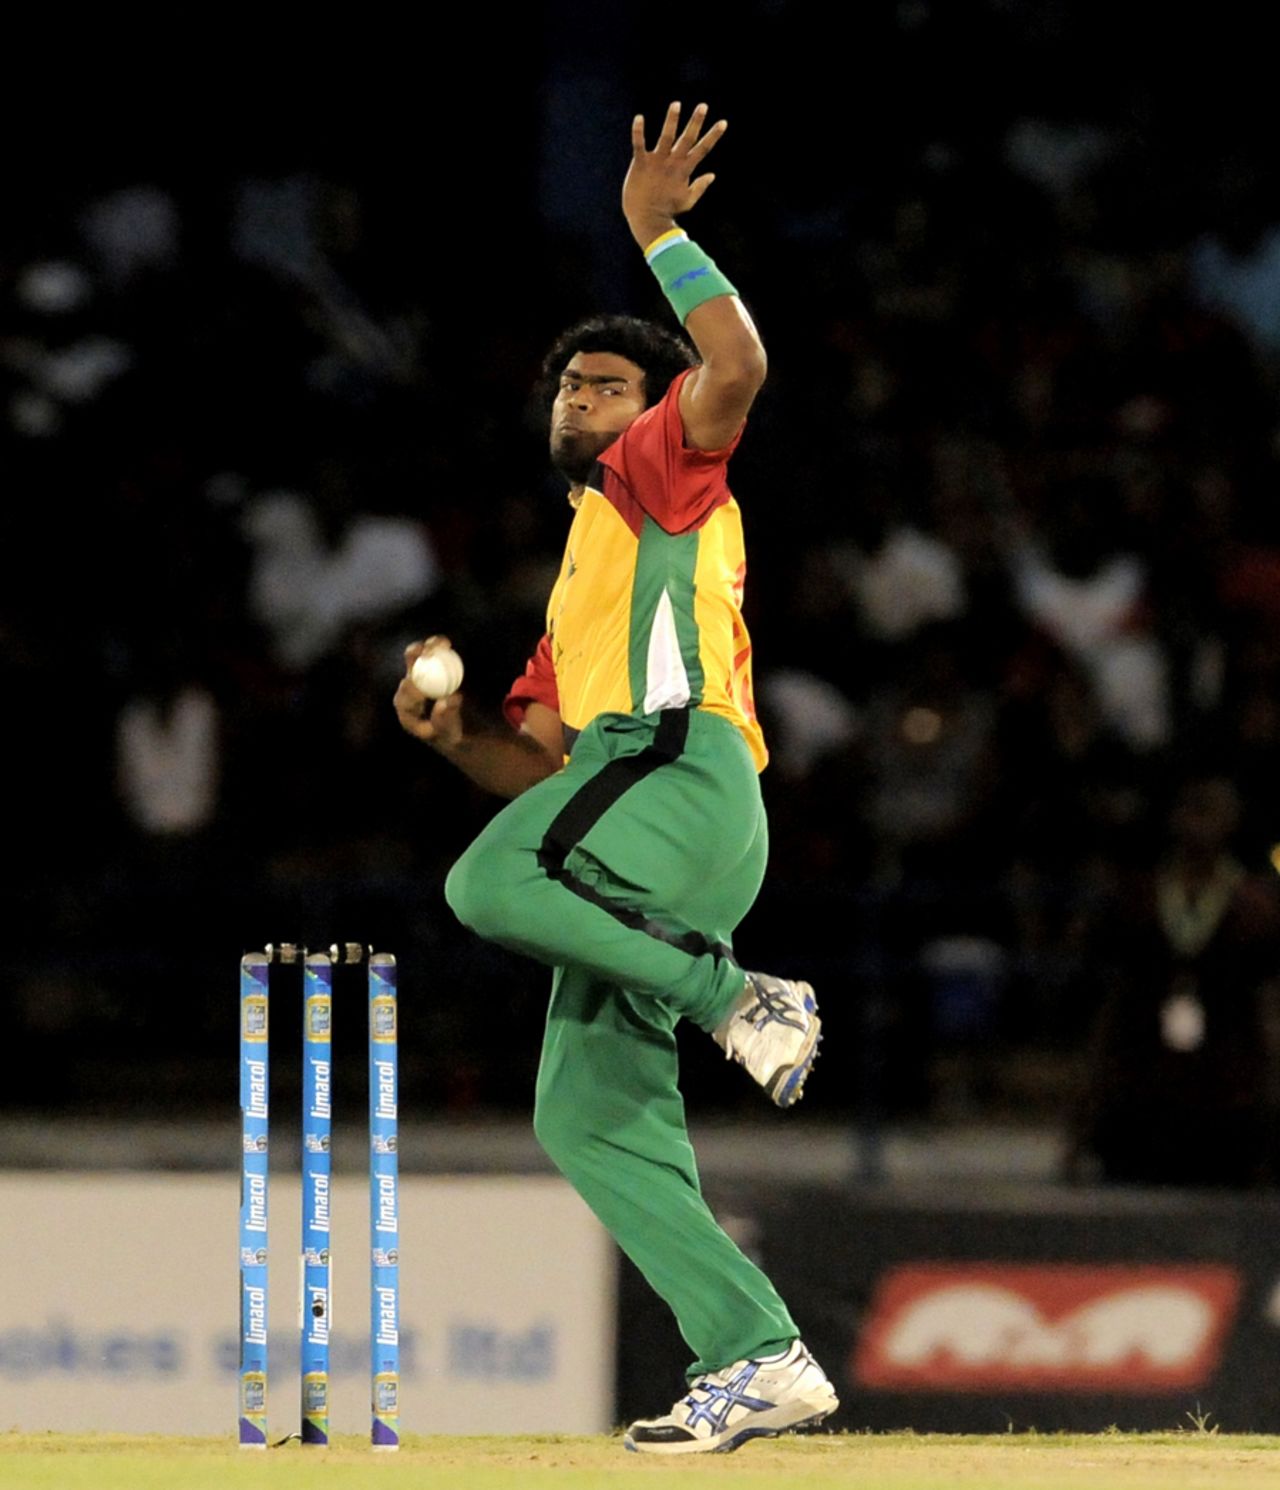 Lasith Malinga in his delivery stride, Trinidad & Tobago Red Steel v Guyana Amazon Warriors, Caribbean Premier League 2013, 1st semi-final, Port-of-Spain, August 22, 2013